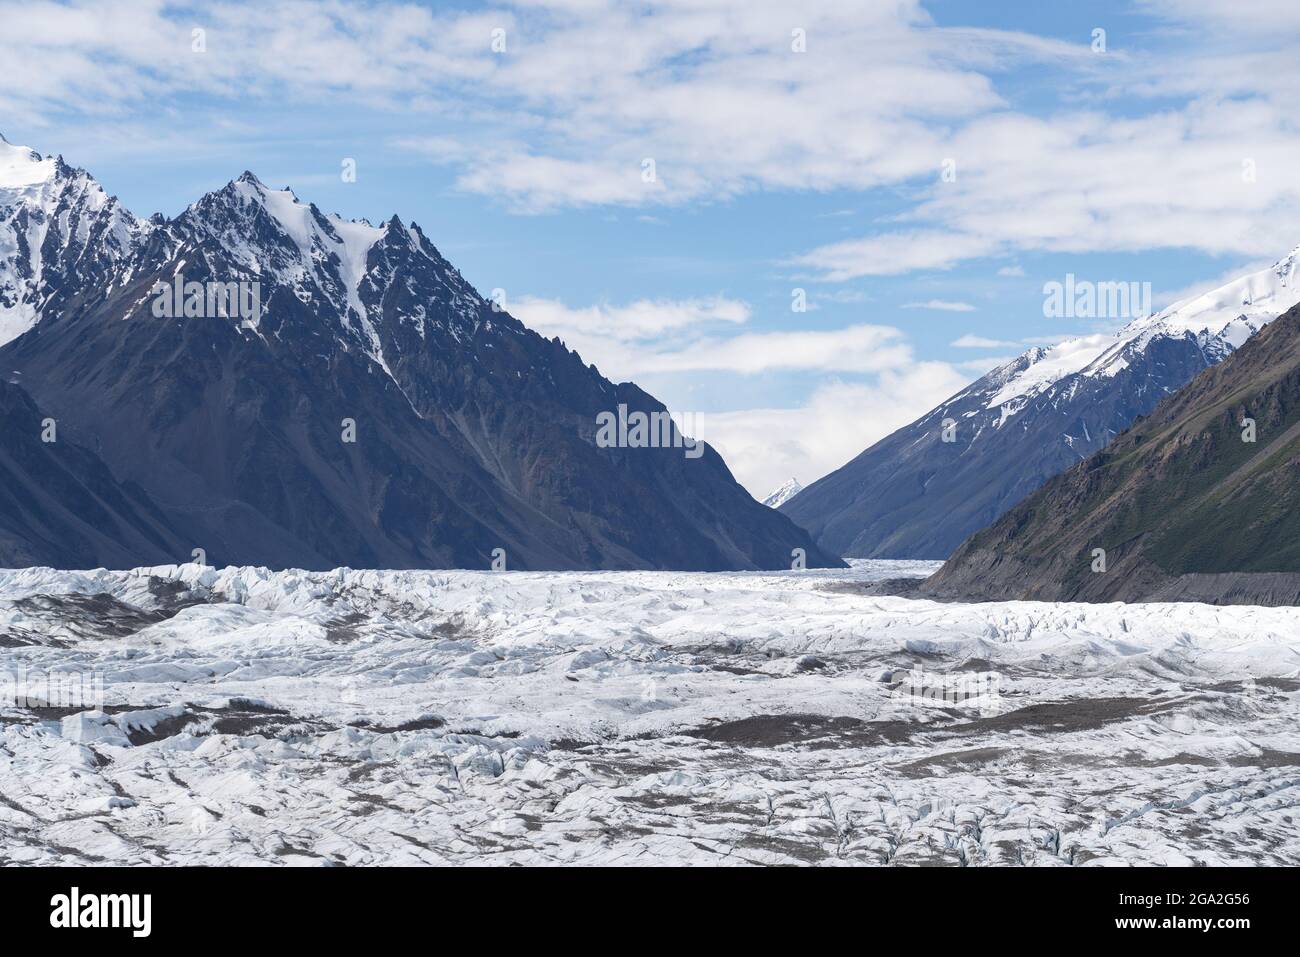 Massive glacial flow ice of the Donjek Glacier through the snowcapped mountain peaks; Kluane National Park and Reserve, Yukon, Canada Stock Photo